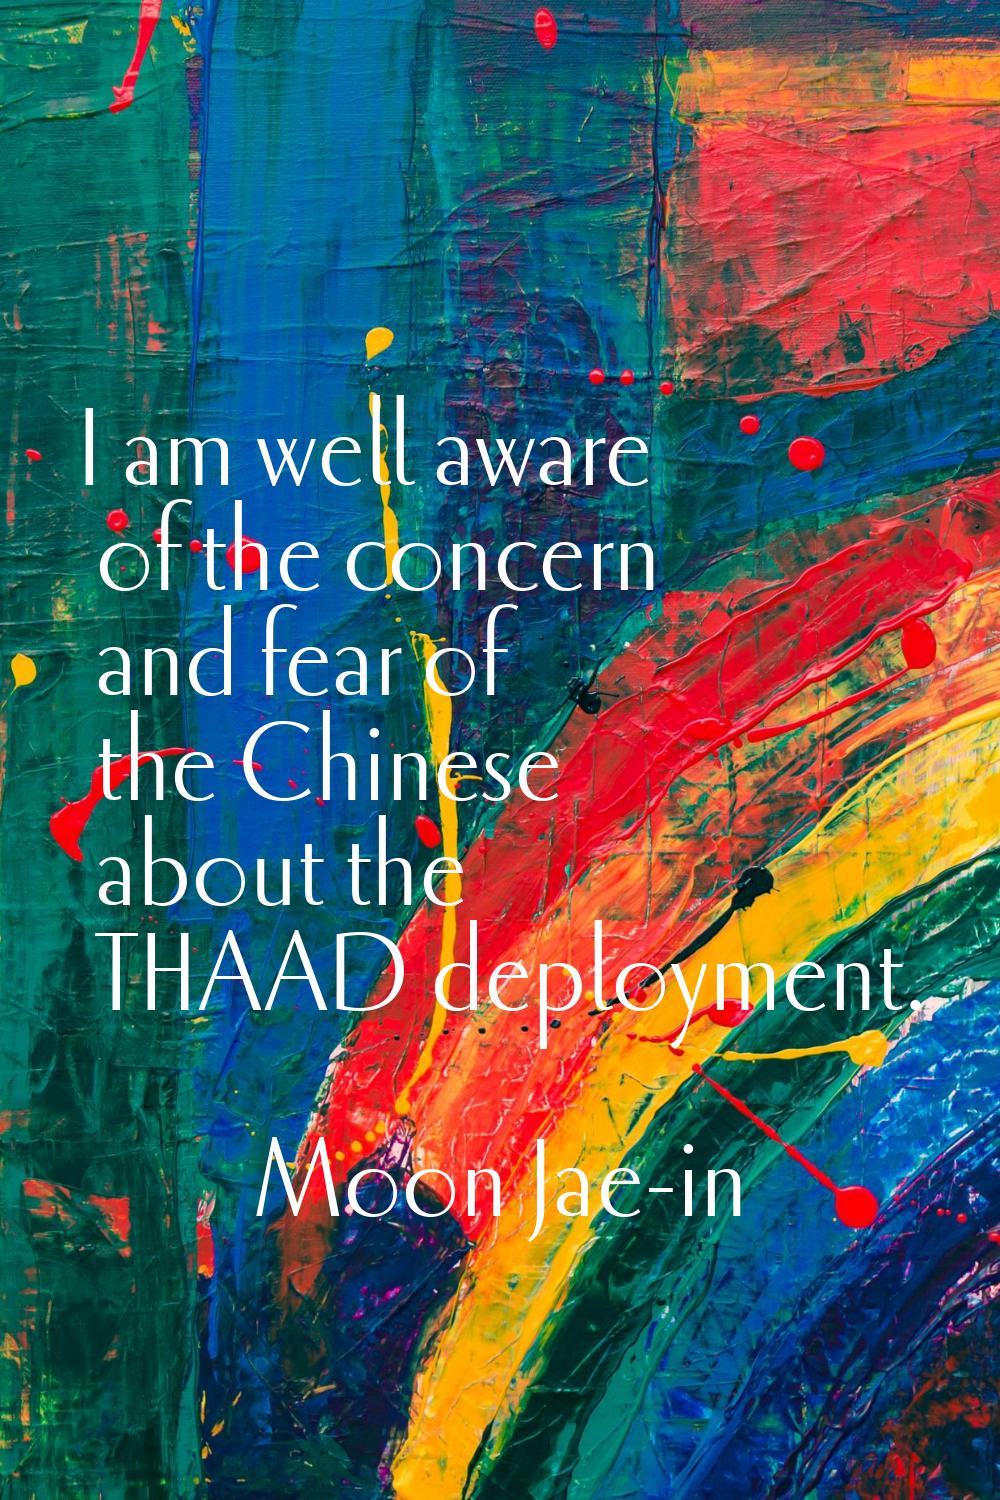 I am well aware of the concern and fear of the Chinese about the THAAD deployment.